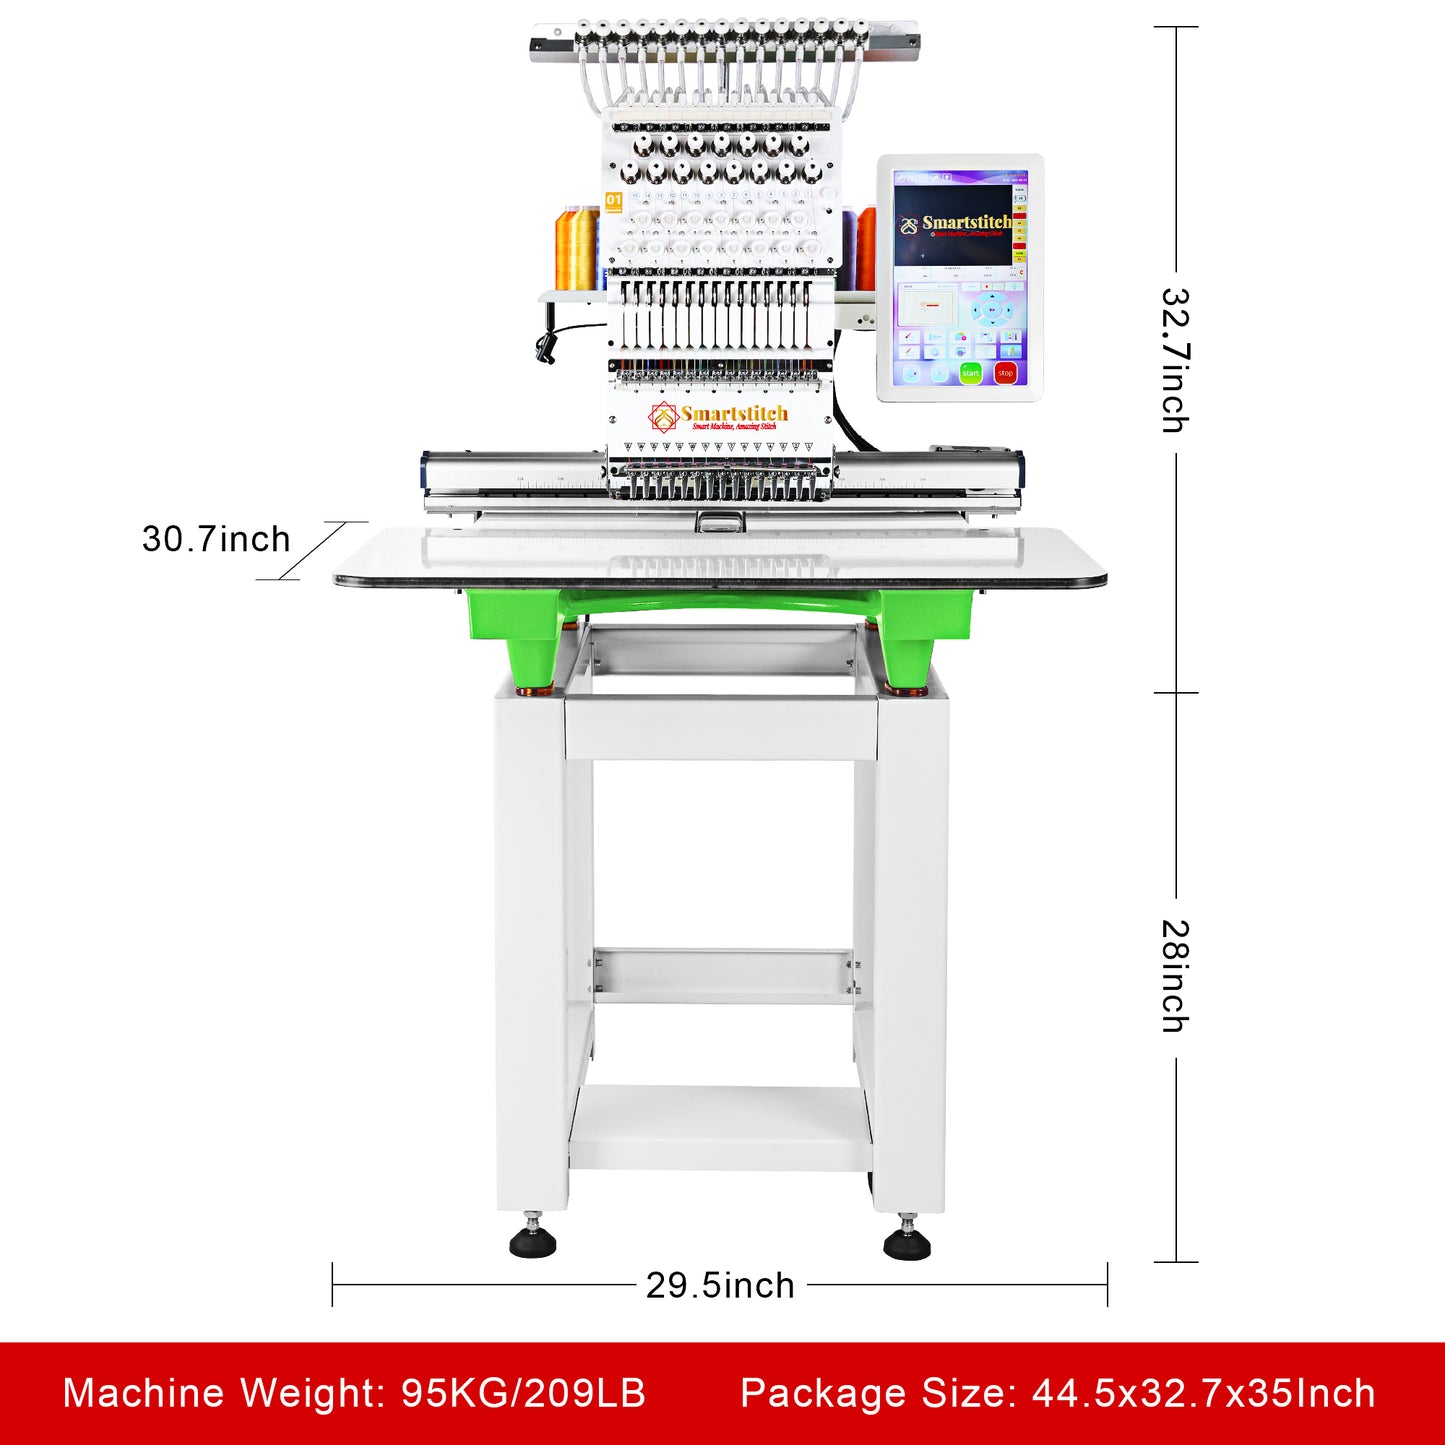 Smartstitch Embroidery Machine S1501, 15 Needles, Max Speed 1200RPM, Commercial Embroidery Machine for Hats and Clothing with 13.8"x19.7" Embroidery Area